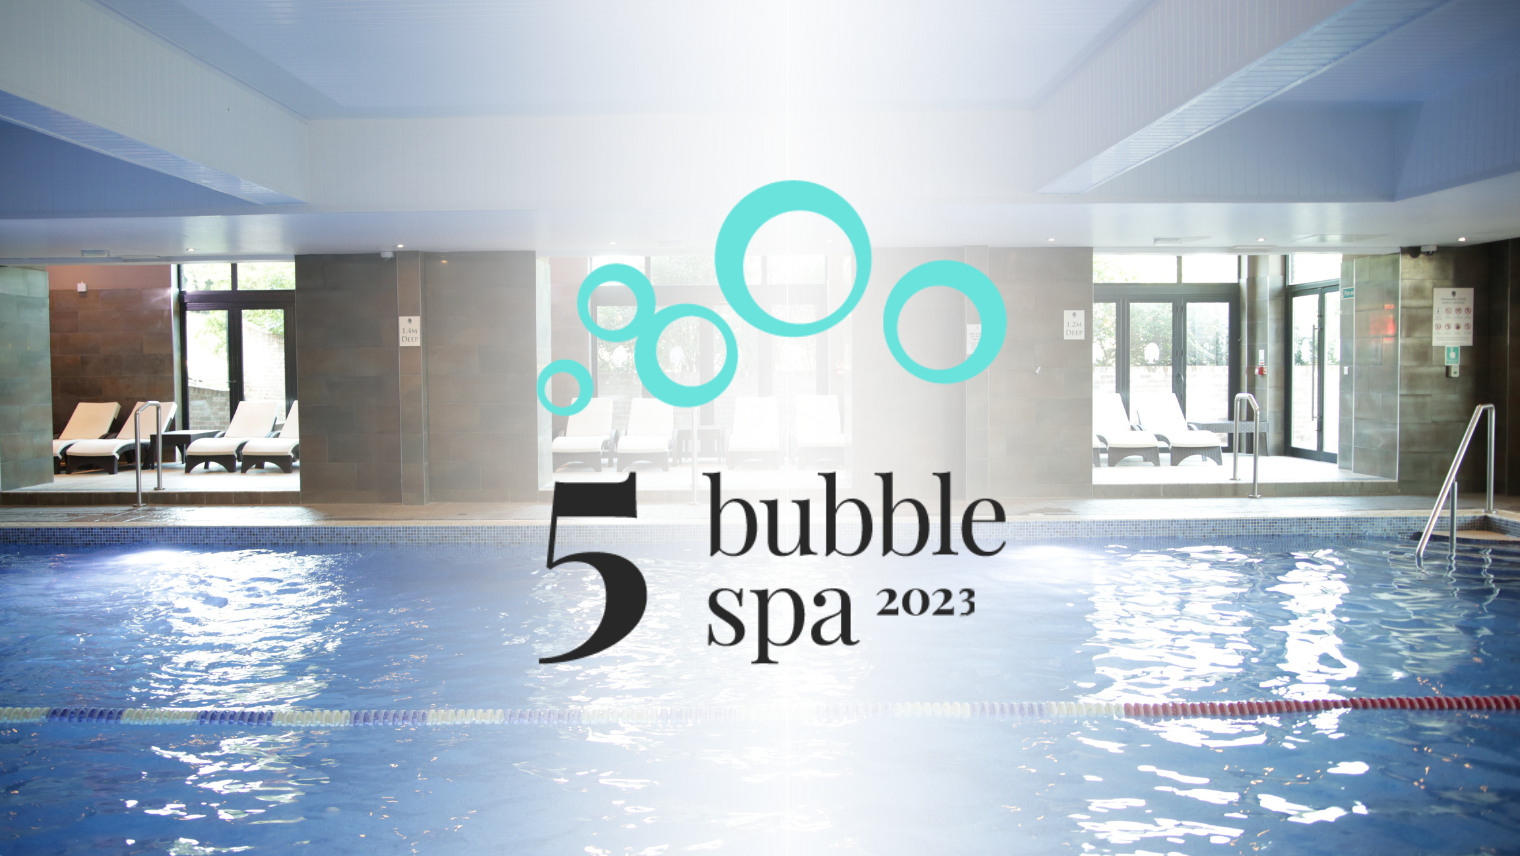 We've Been Rated as a 5 Bubble Spa! 